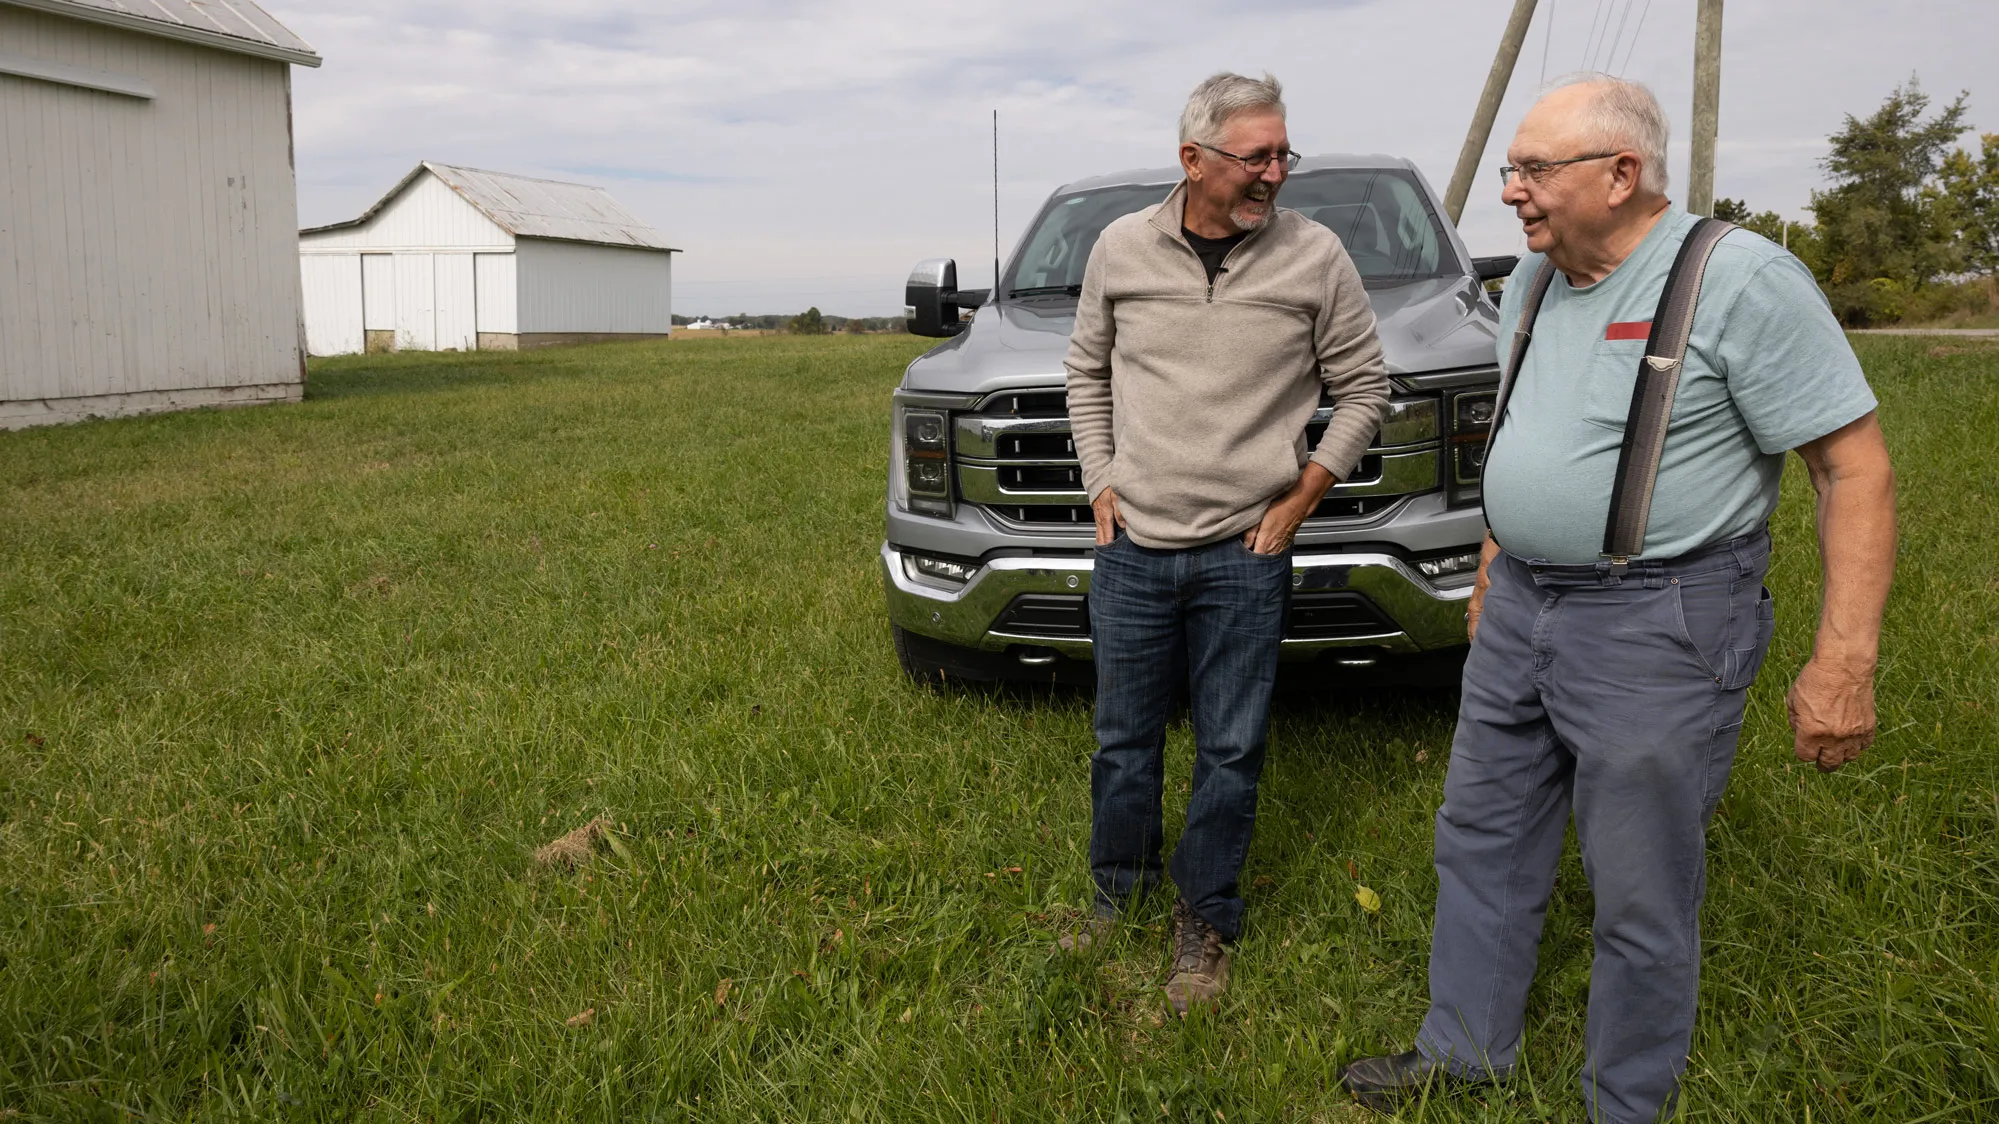 Two men laugh as they chat in a grassy area in front of a truck. Two painted barnlike buildings are off to their right. Both men are older white men. One, Doug Morgan, wears a quarter-zip sweater and jeans and has his hands tucked in his pockets as he listens. The other, Larry Layman, wears a T-shirt and work pants held up by suspenders and looks like he’s telling a good story. 